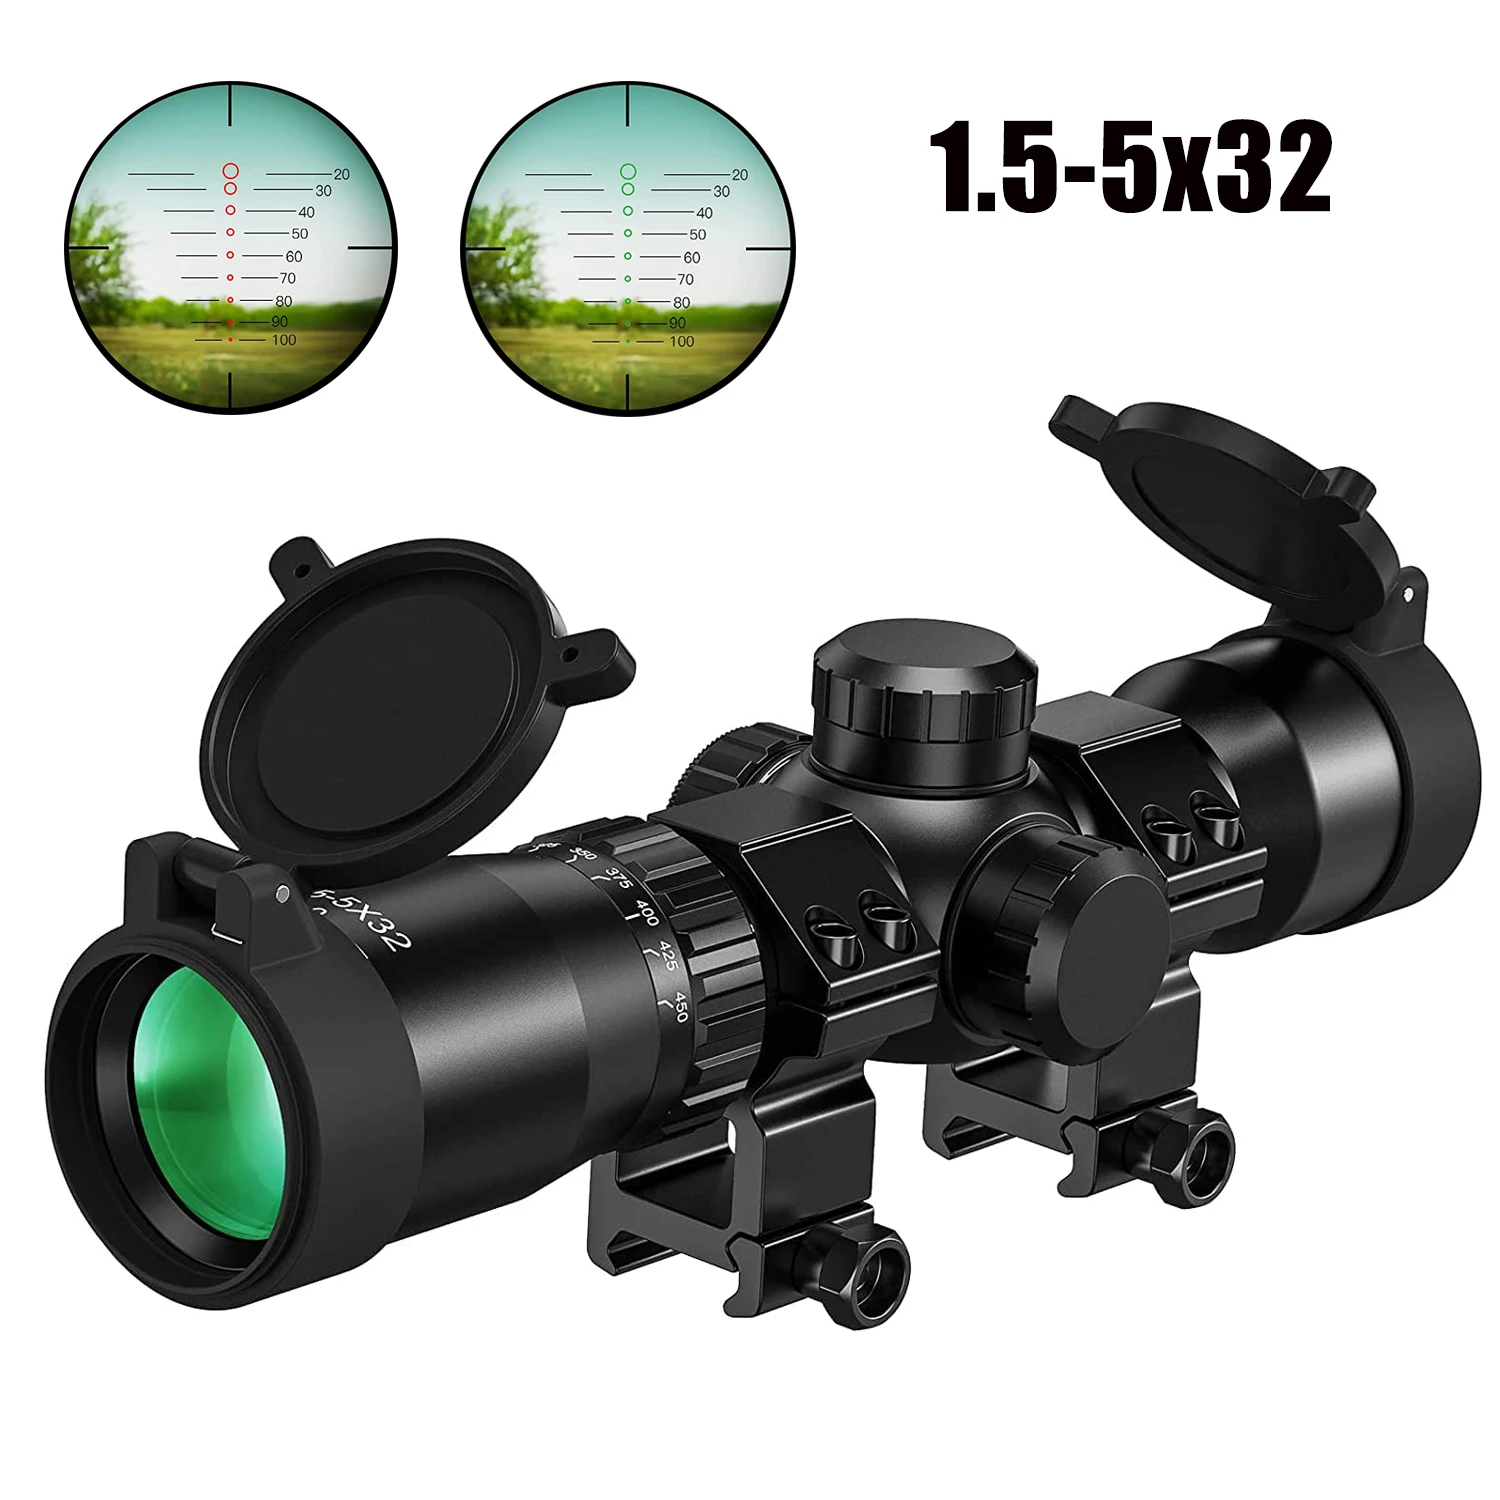 Professional Crossbow Scope 20-100 Yards 5 Level Brightness Red and Green Illuminated Etched Glass Reticle Hunting Riflescope